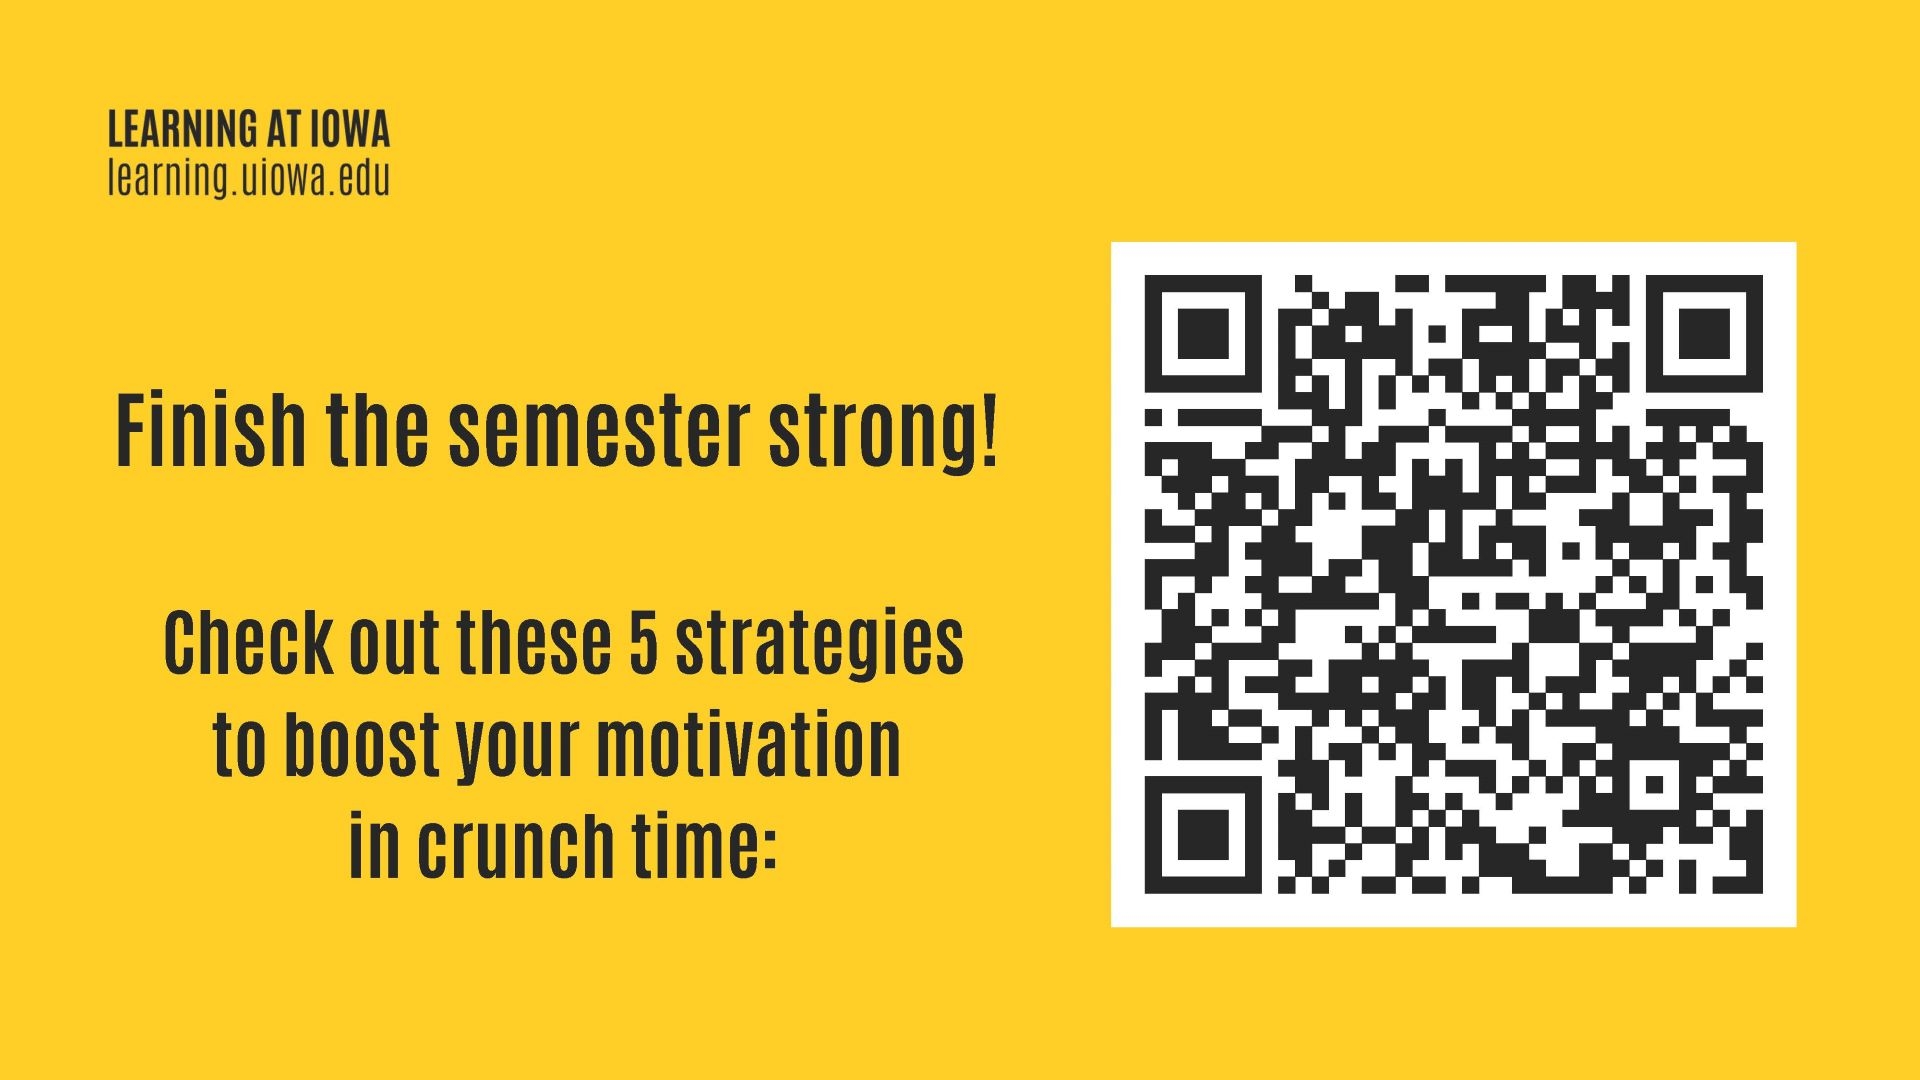 Learning at Iowa learning.uiowa.edu Finish the semester strong! Check out these 5 strategies to boost your motivation in crunch time: QR CODE